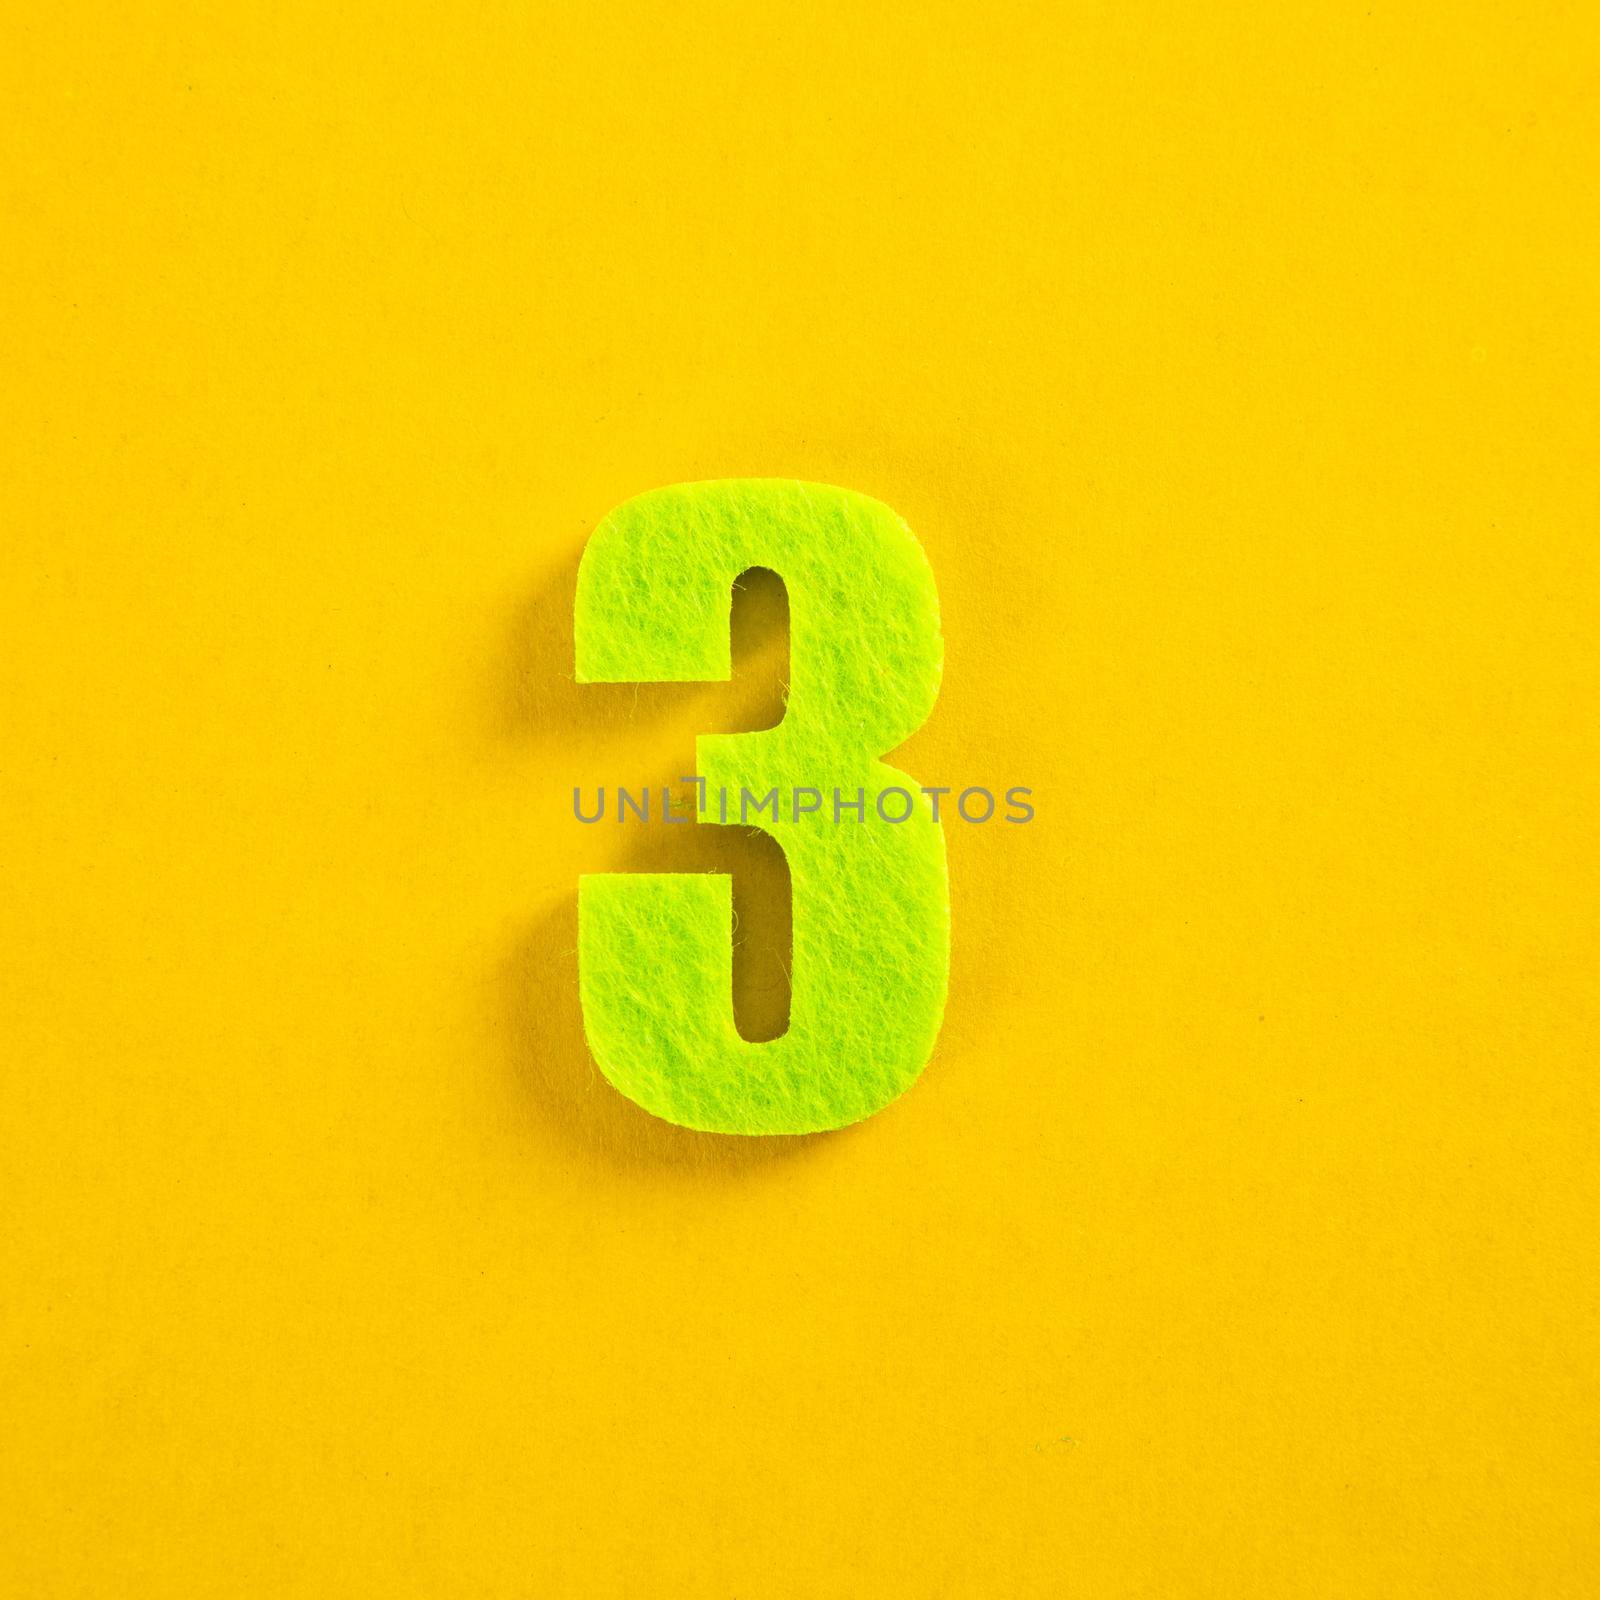 A colorful number on yellow background by tehcheesiong